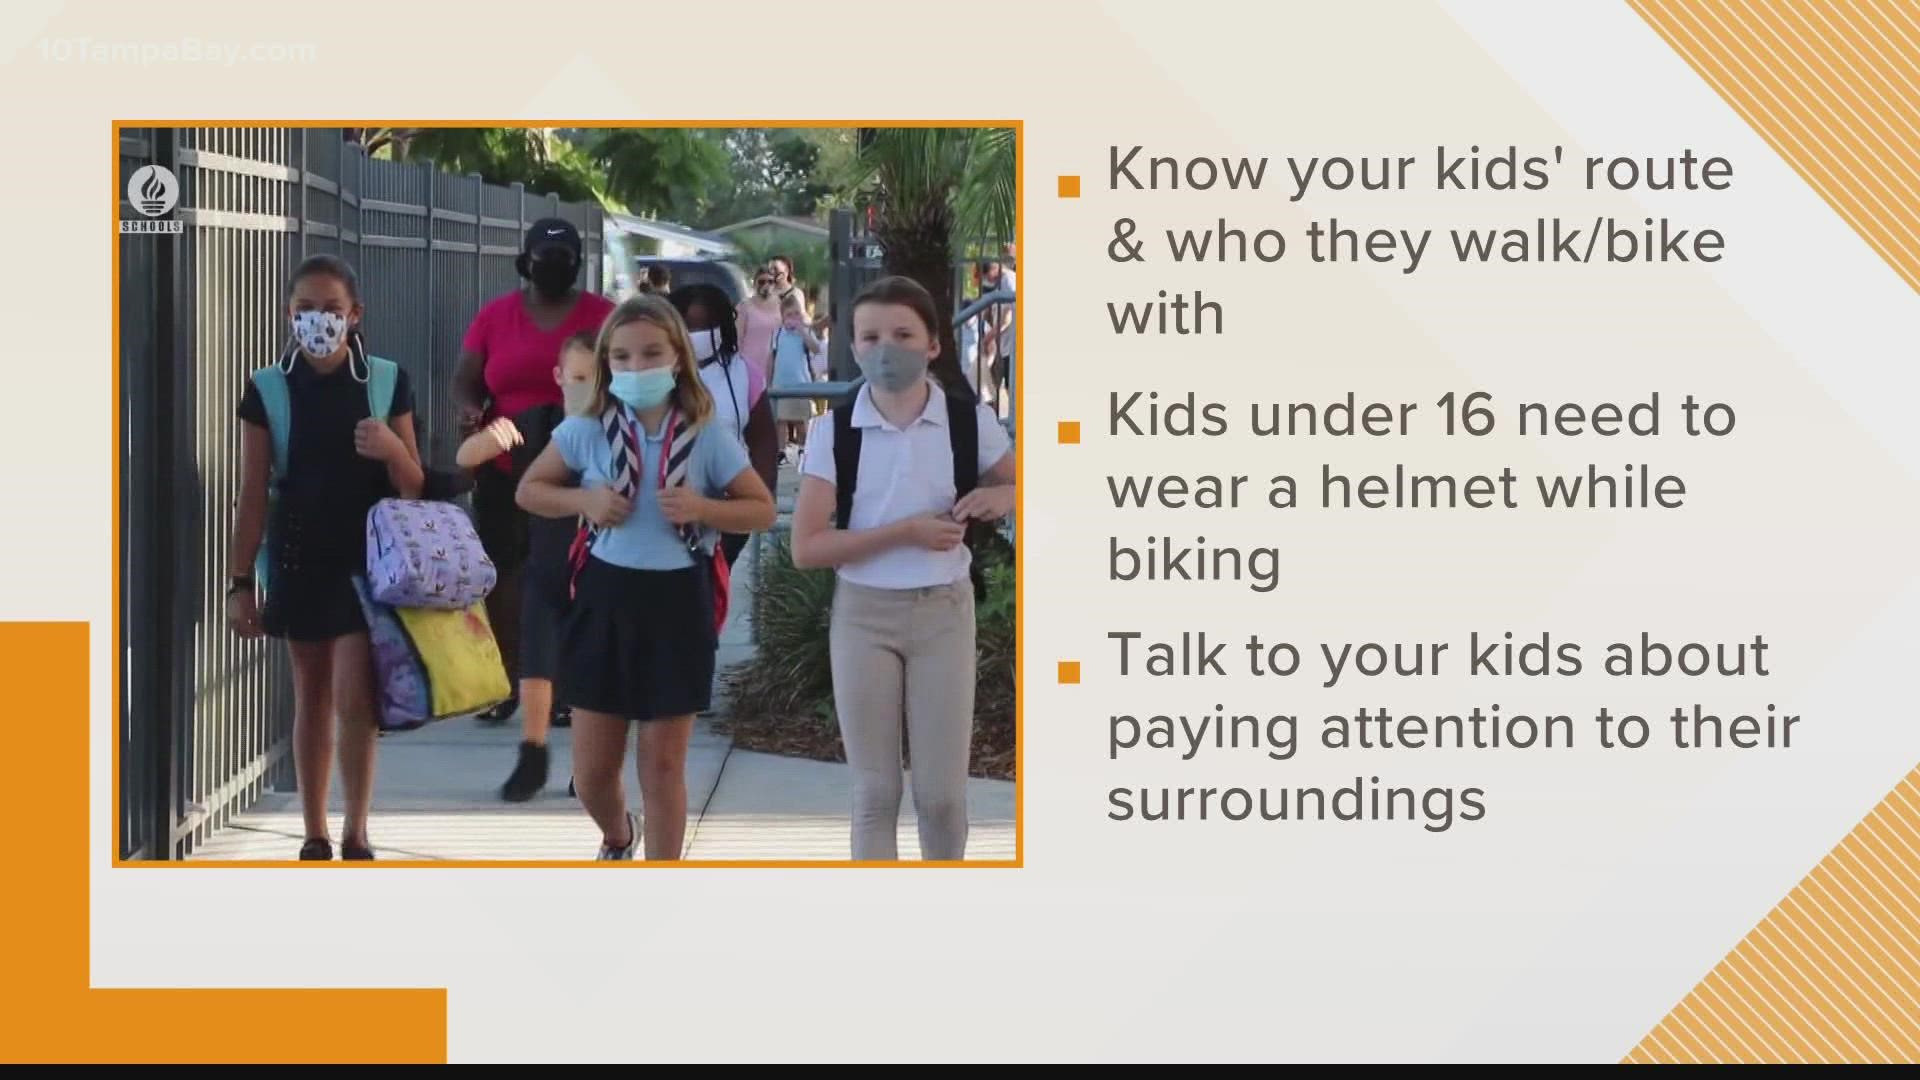 Make sure to know your kids' route to school and talk to them about paying attention to their surroundings.